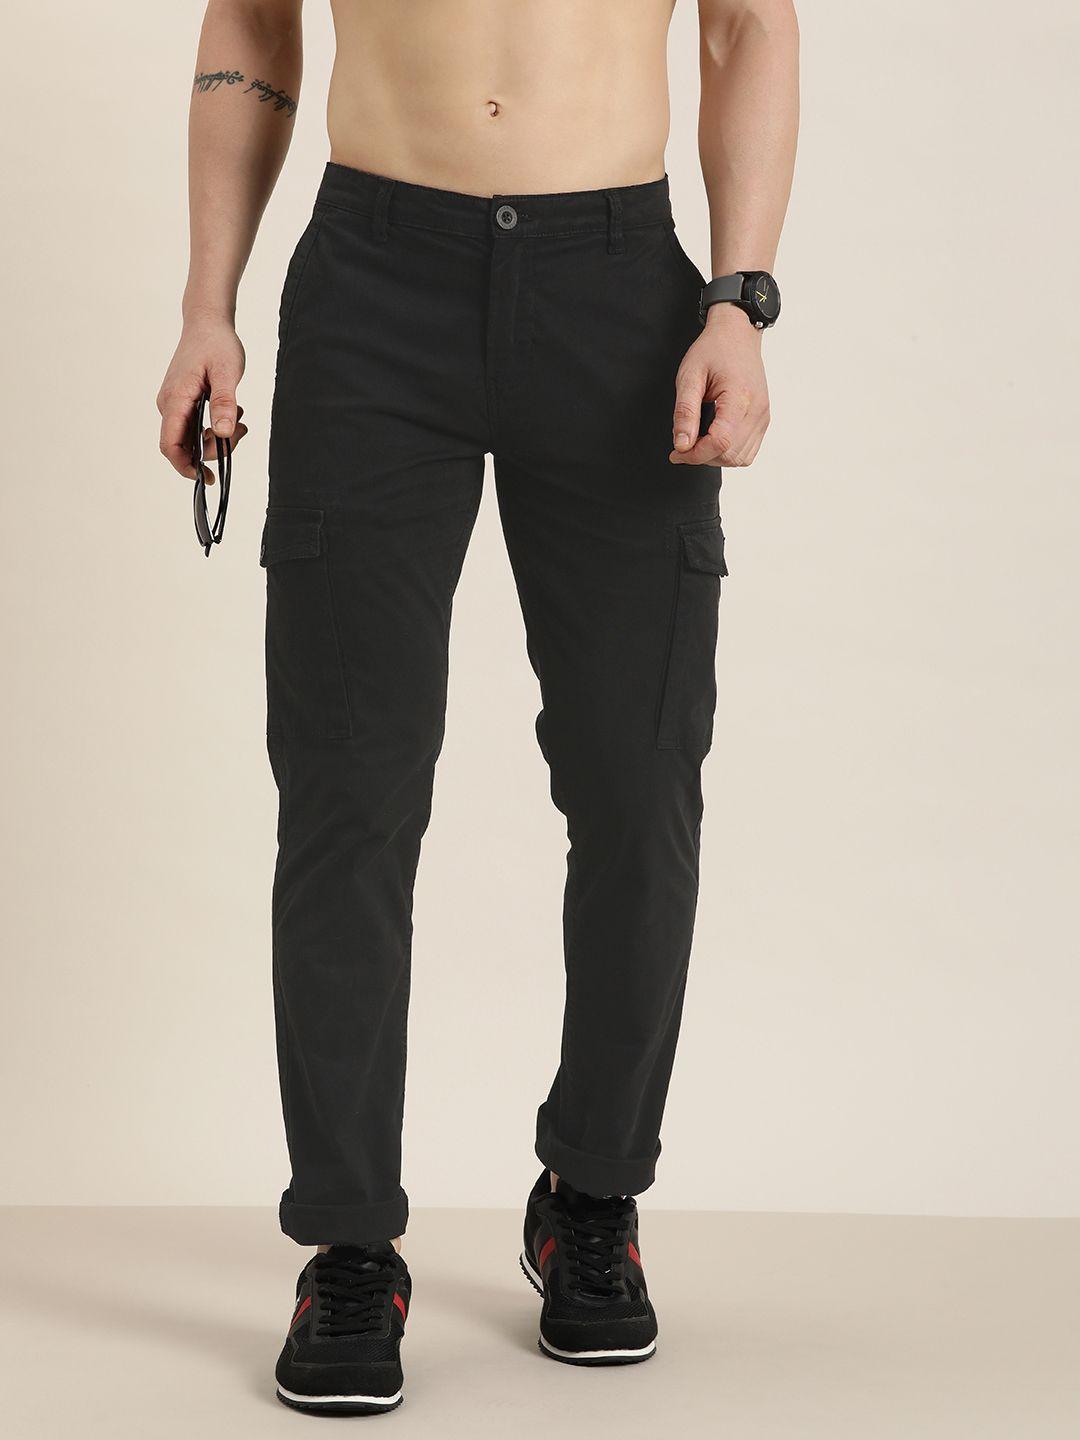 here&now men solid cargos trousers